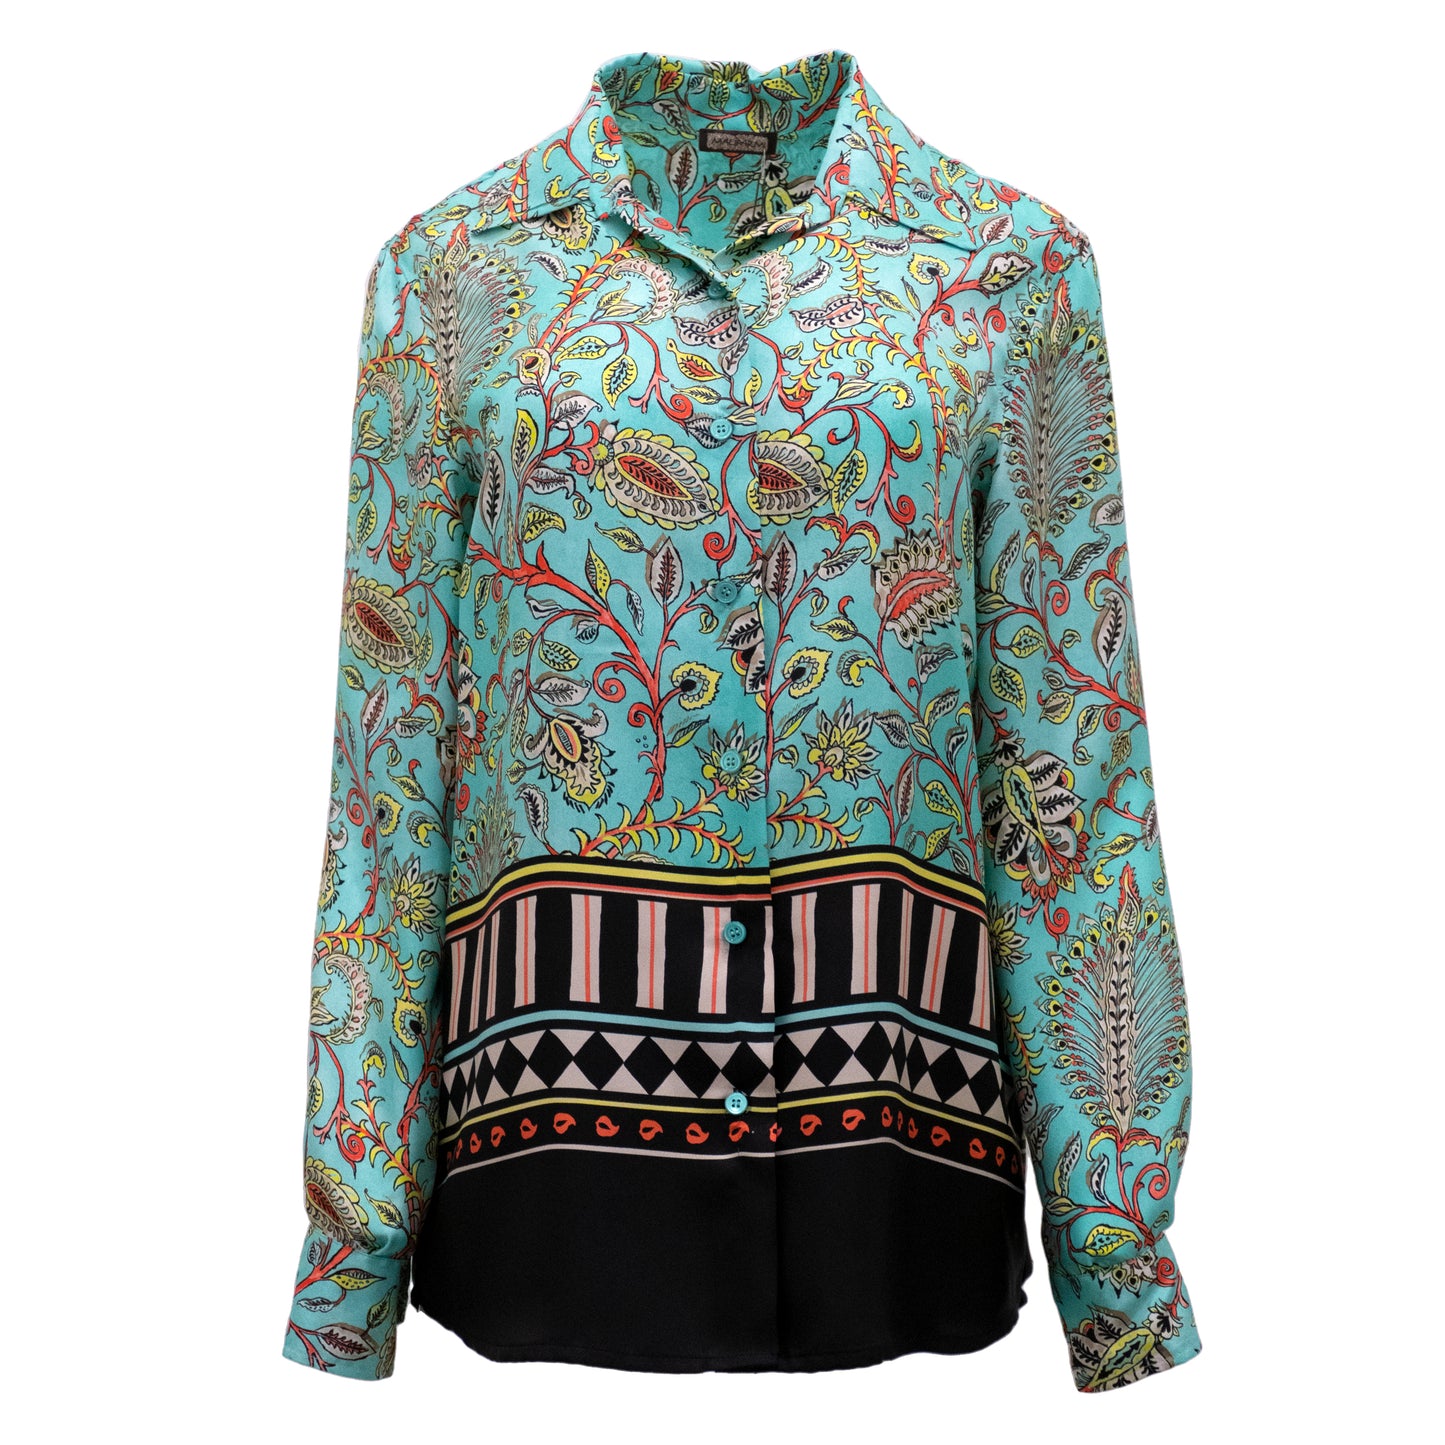 Teal & Pink Paisley Blouse